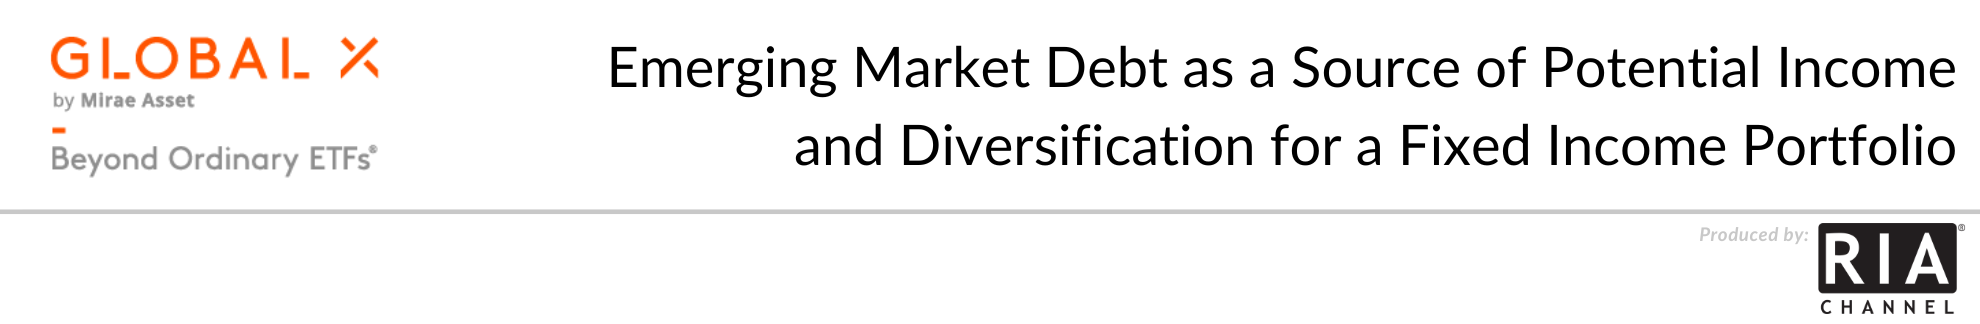 Emerging Market Debt as a Source of Potential Income and Diversification for a Fixed Income Portfolio